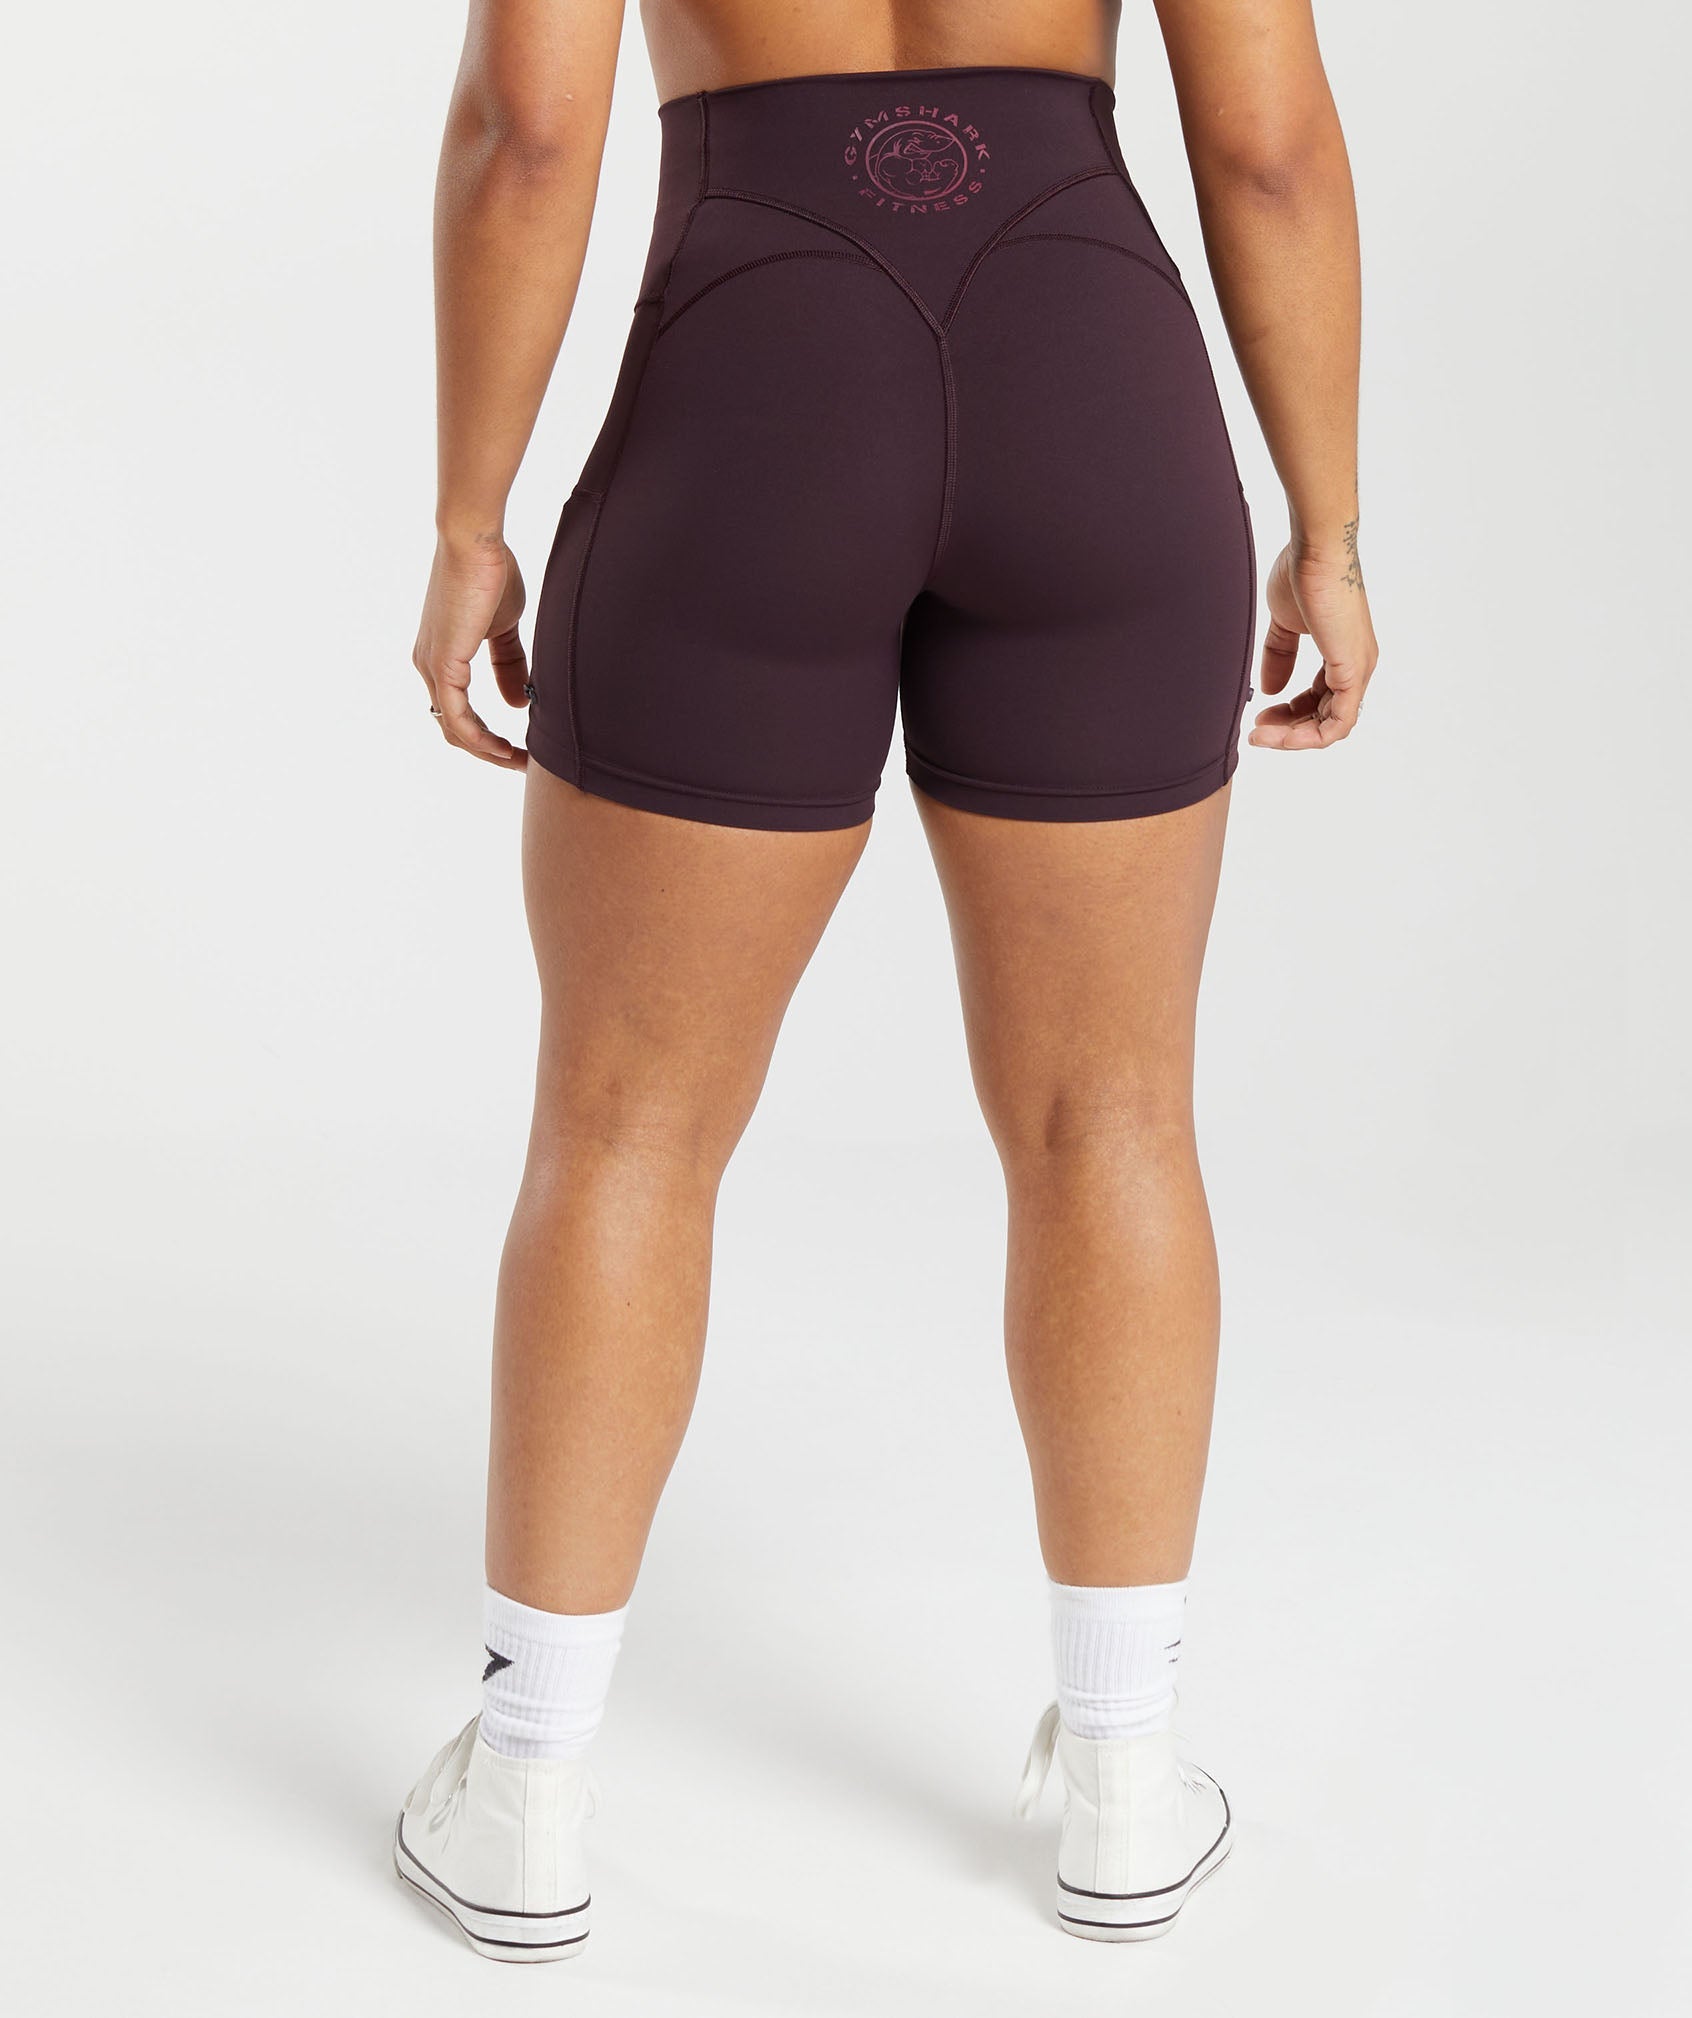 Legacy Tight Shorts in Plum Brown - view 2